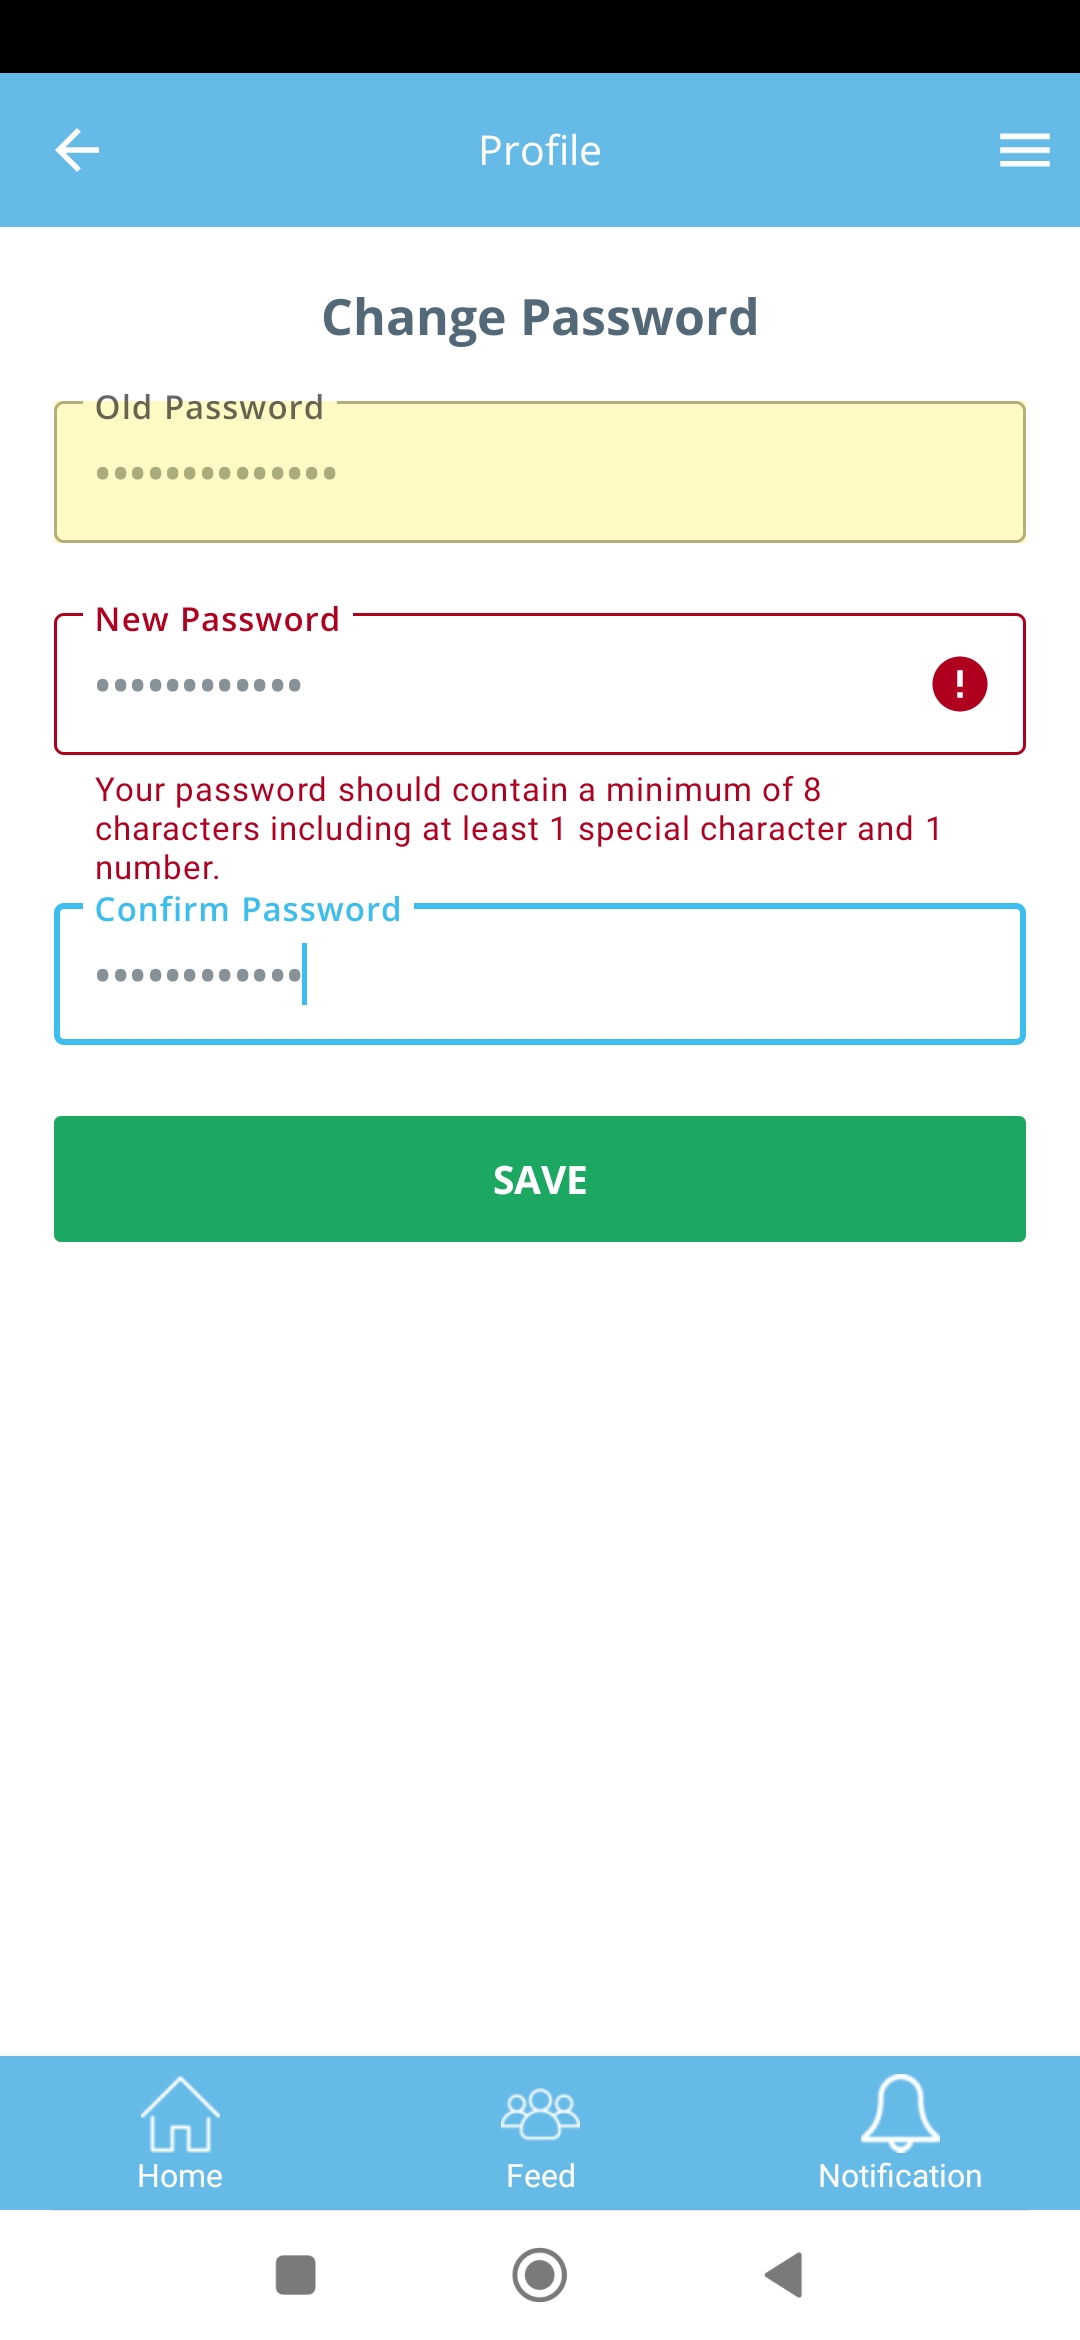 Warning message appears when user provides new password according to requirements